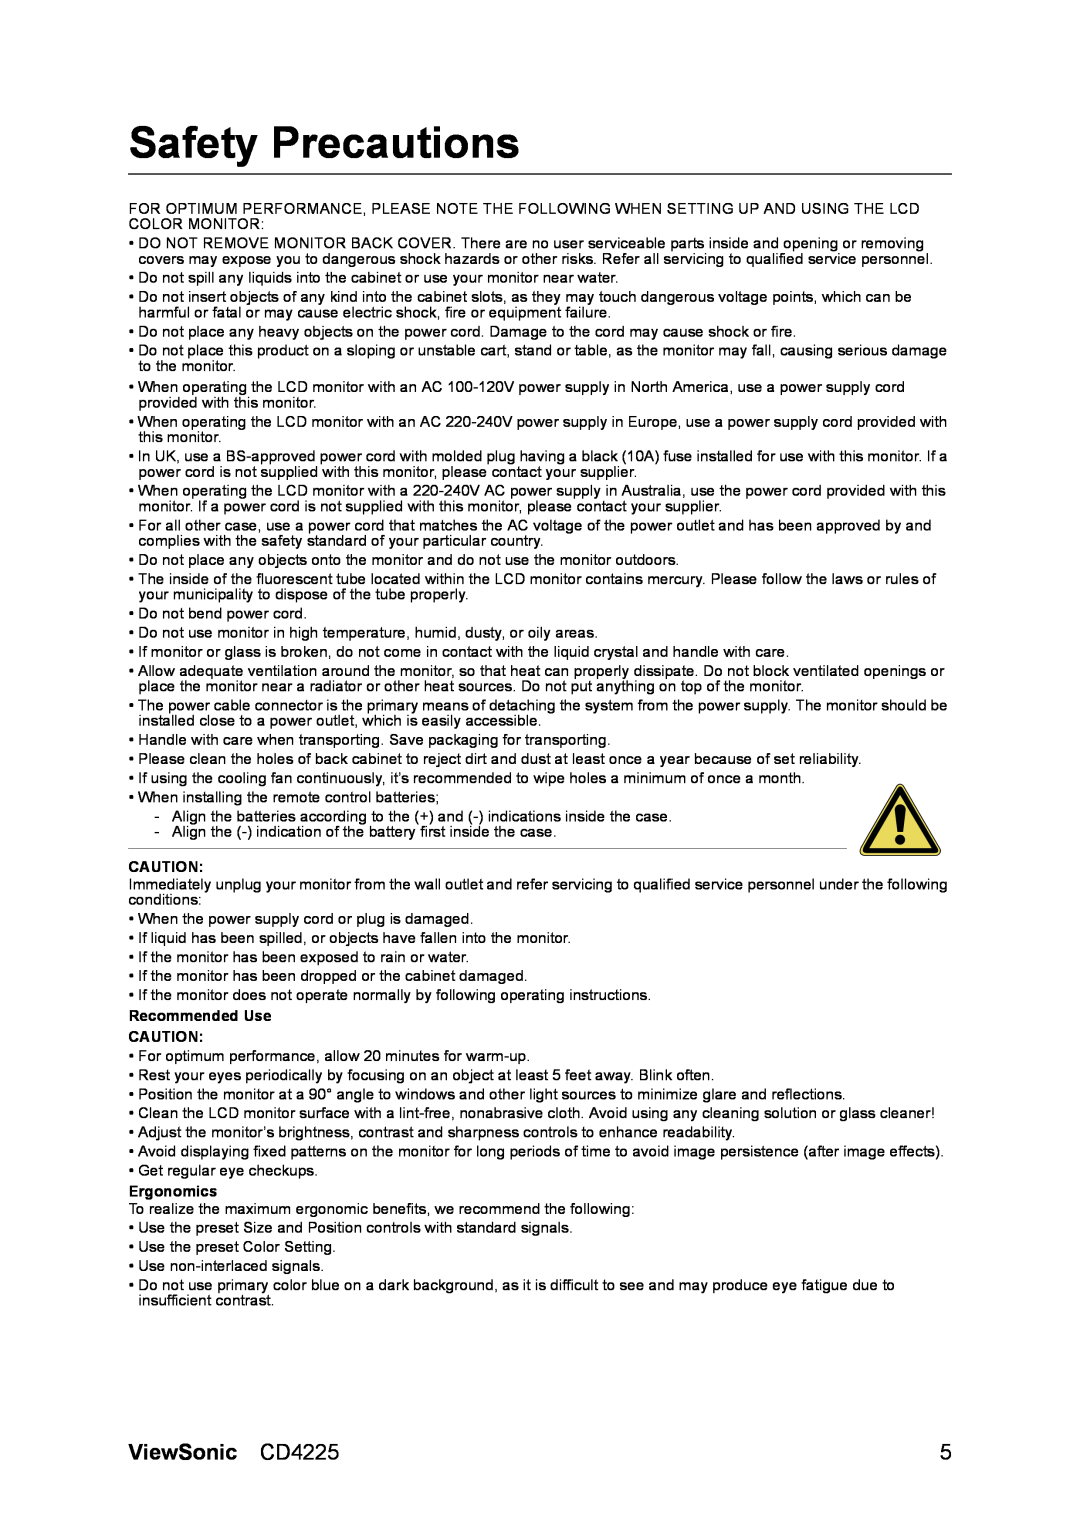 ViewSonic CD4225 manual Safety Precautions, Recommended Use, Ergonomics 